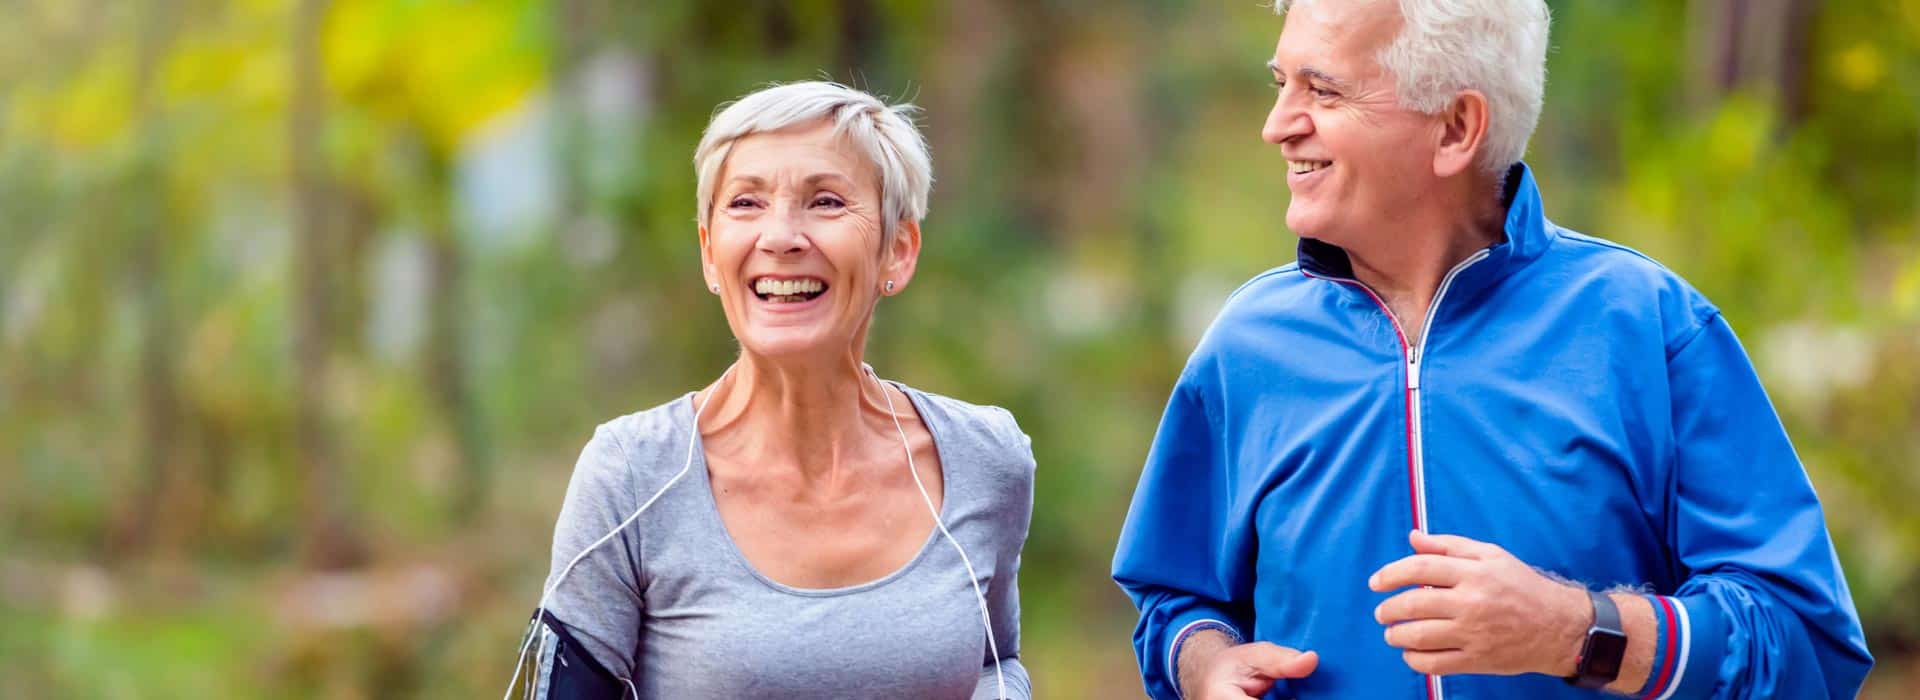 Mature Active Lifestyle - AllCare Medical Centers